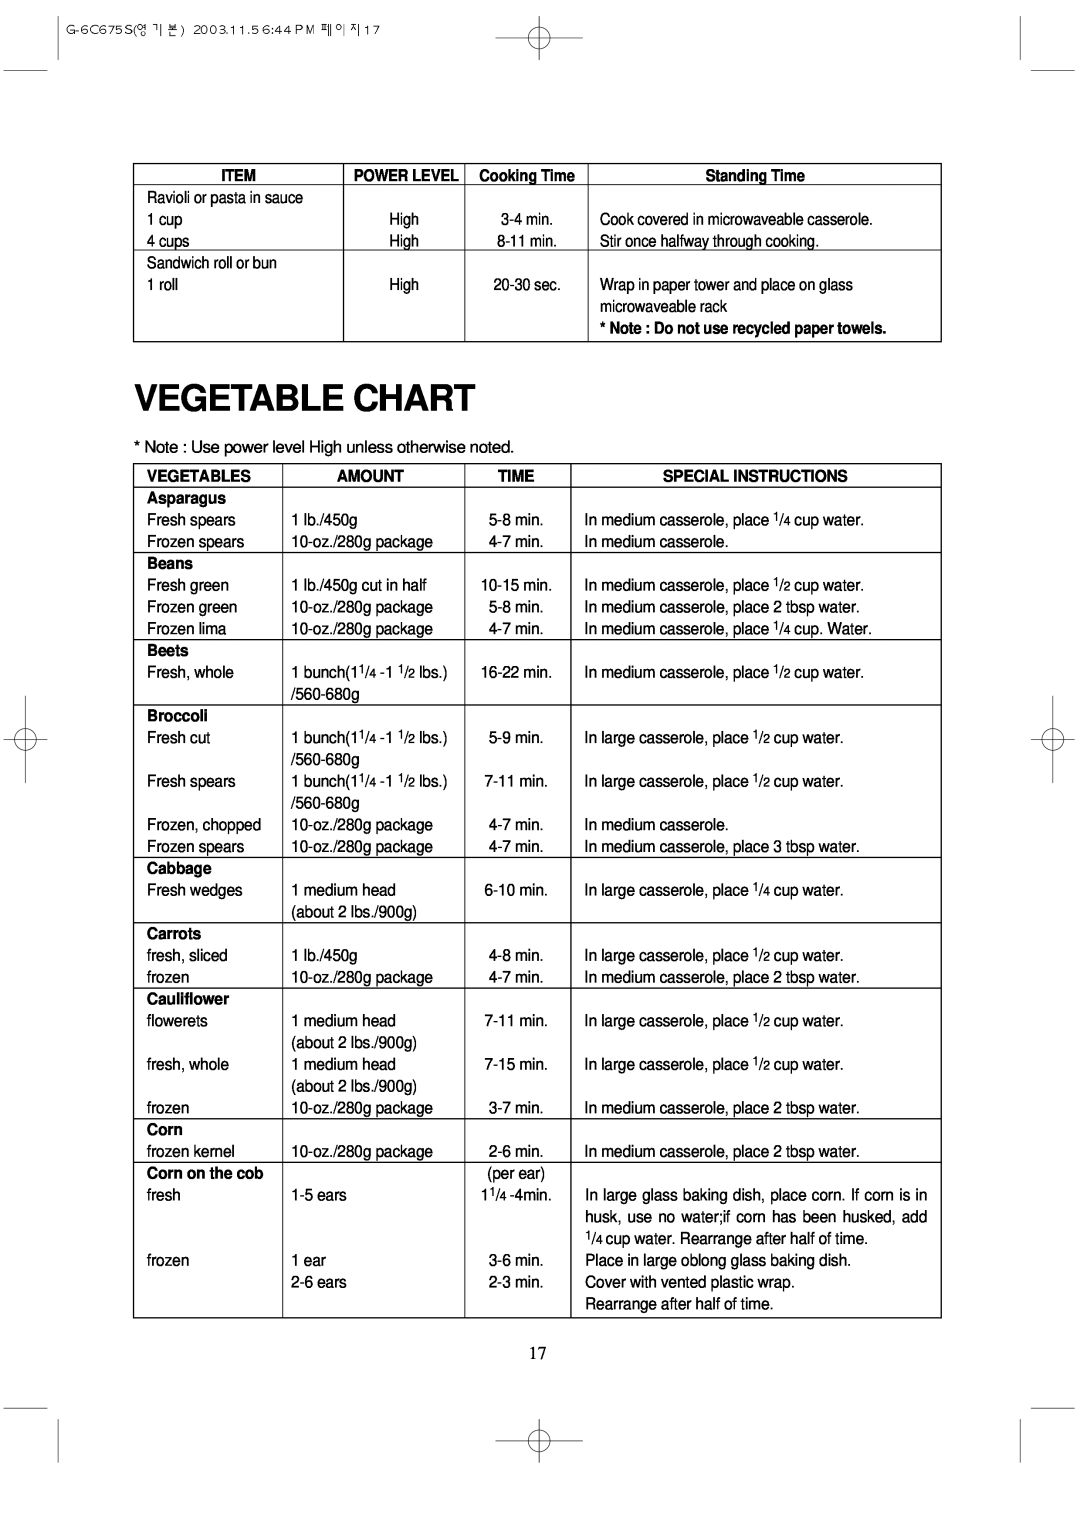 Daewoo KOG-3C675S Vegetable Chart, Cooking Time, Standing Time, Note Do not use recycled paper towels, Vegetables, Amount 